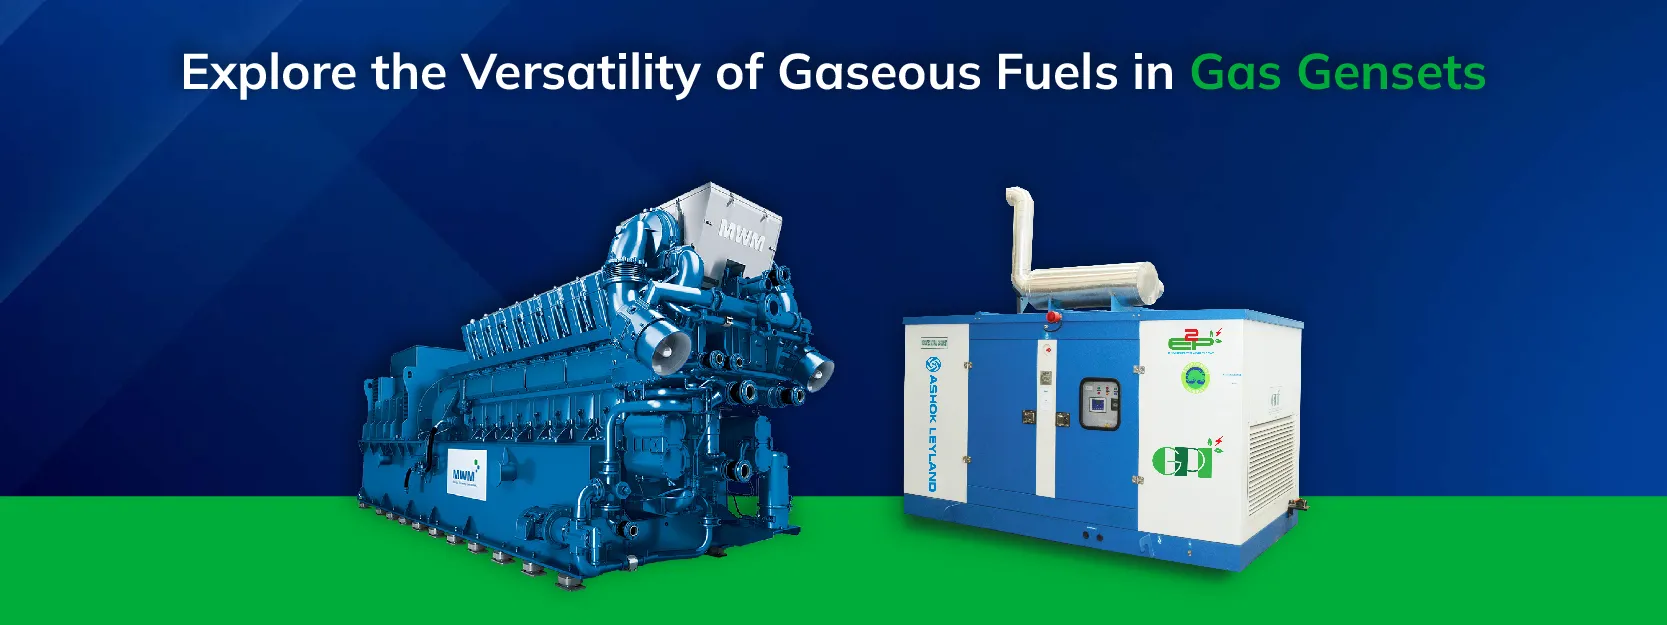 Explore-the-Versatility-of-Gaseous-Fuels-in-Gas-Gensets